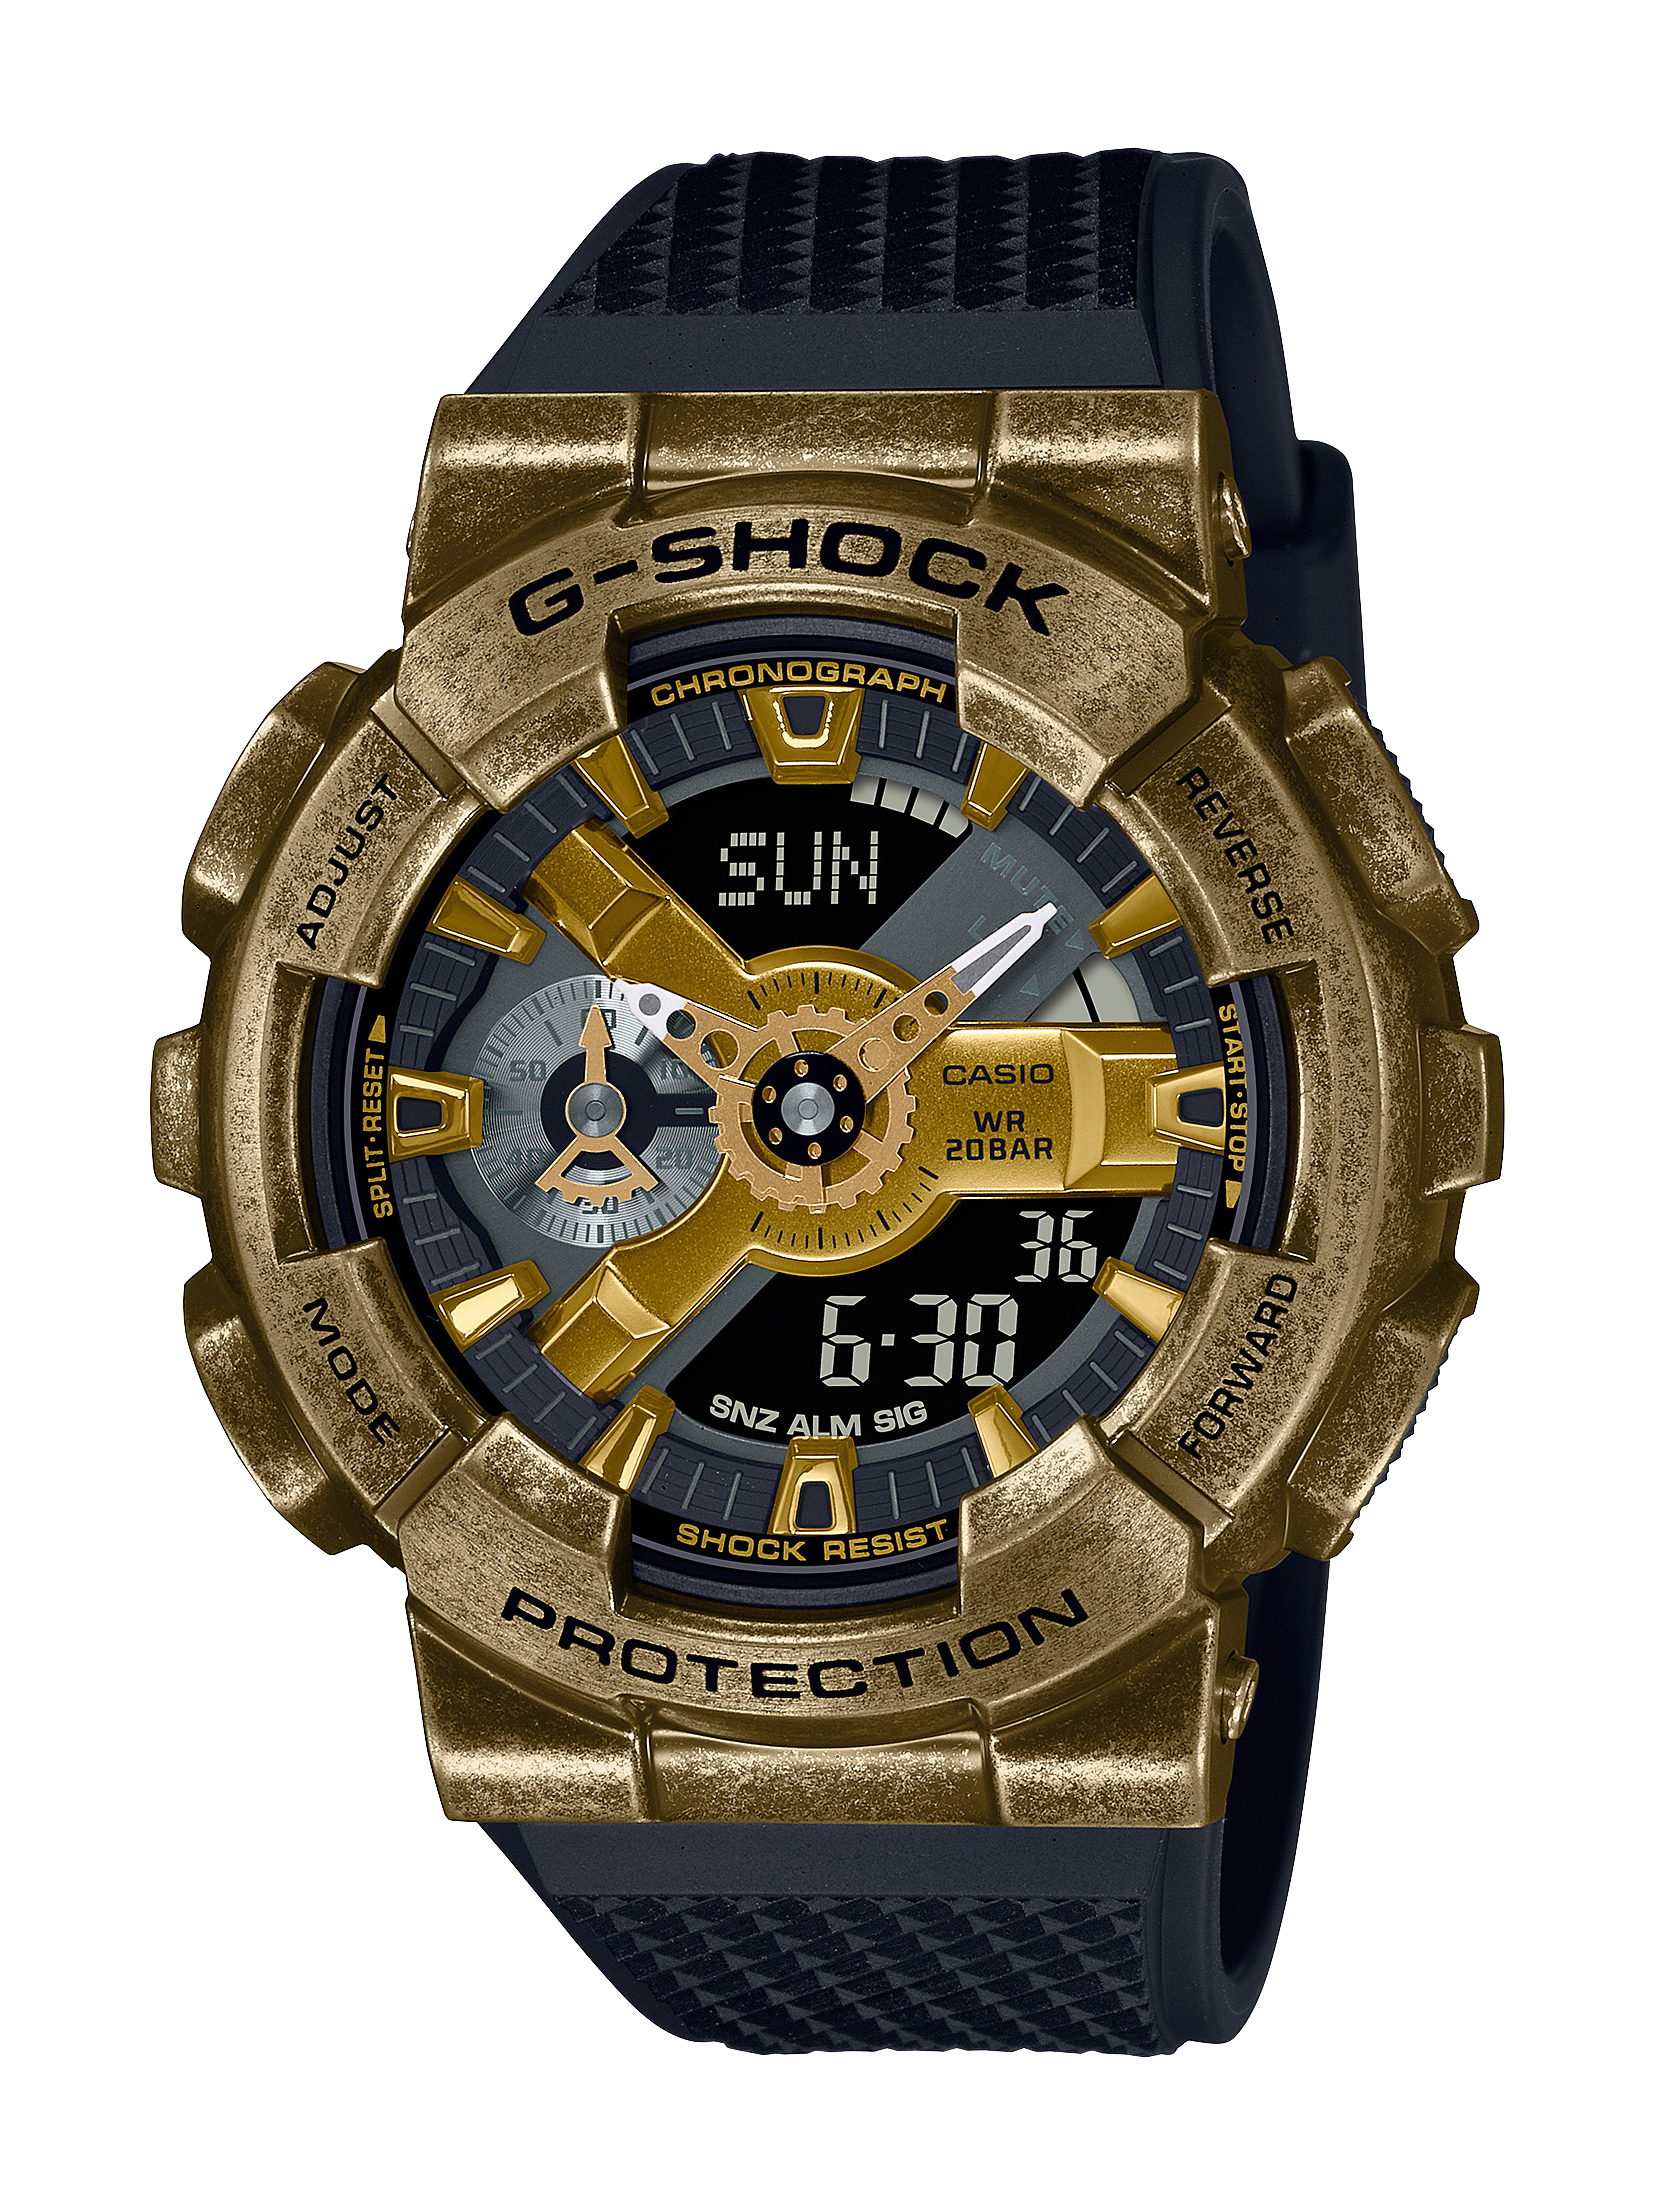 GM110VG-1A9 | Metal Covered | G-Shock New Zealand – G Shock New